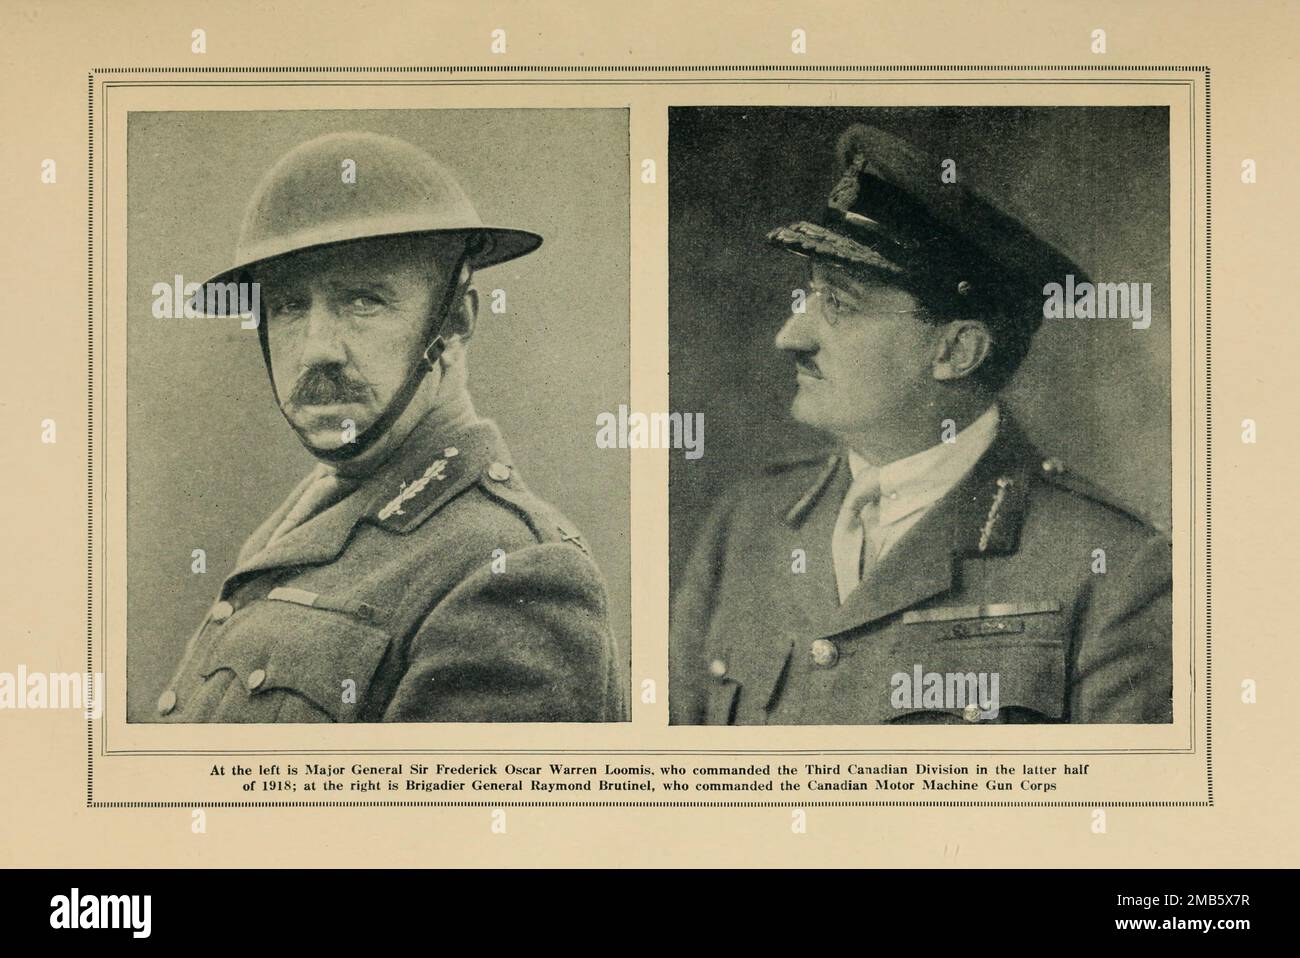 Major General Sir Frederick Oscar Warren Loomis [Left] Brigadier General Raymond Brutinel [Right] from the book The story of the great war; the complete historical records of events to date DIPLOMATIC AND STATE PAPERS by Reynolds, Francis Joseph, 1867-1937; Churchill, Allen Leon; Miller, Francis Trevelyan, 1877-1959; Wood, Leonard, 1860-1927; Knight, Austin Melvin, 1854-1927; Palmer, Frederick, 1873-1958; Simonds, Frank Herbert, 1878-; Ruhl, Arthur Brown, 1876-  Volume VII Published 1920 Stock Photo